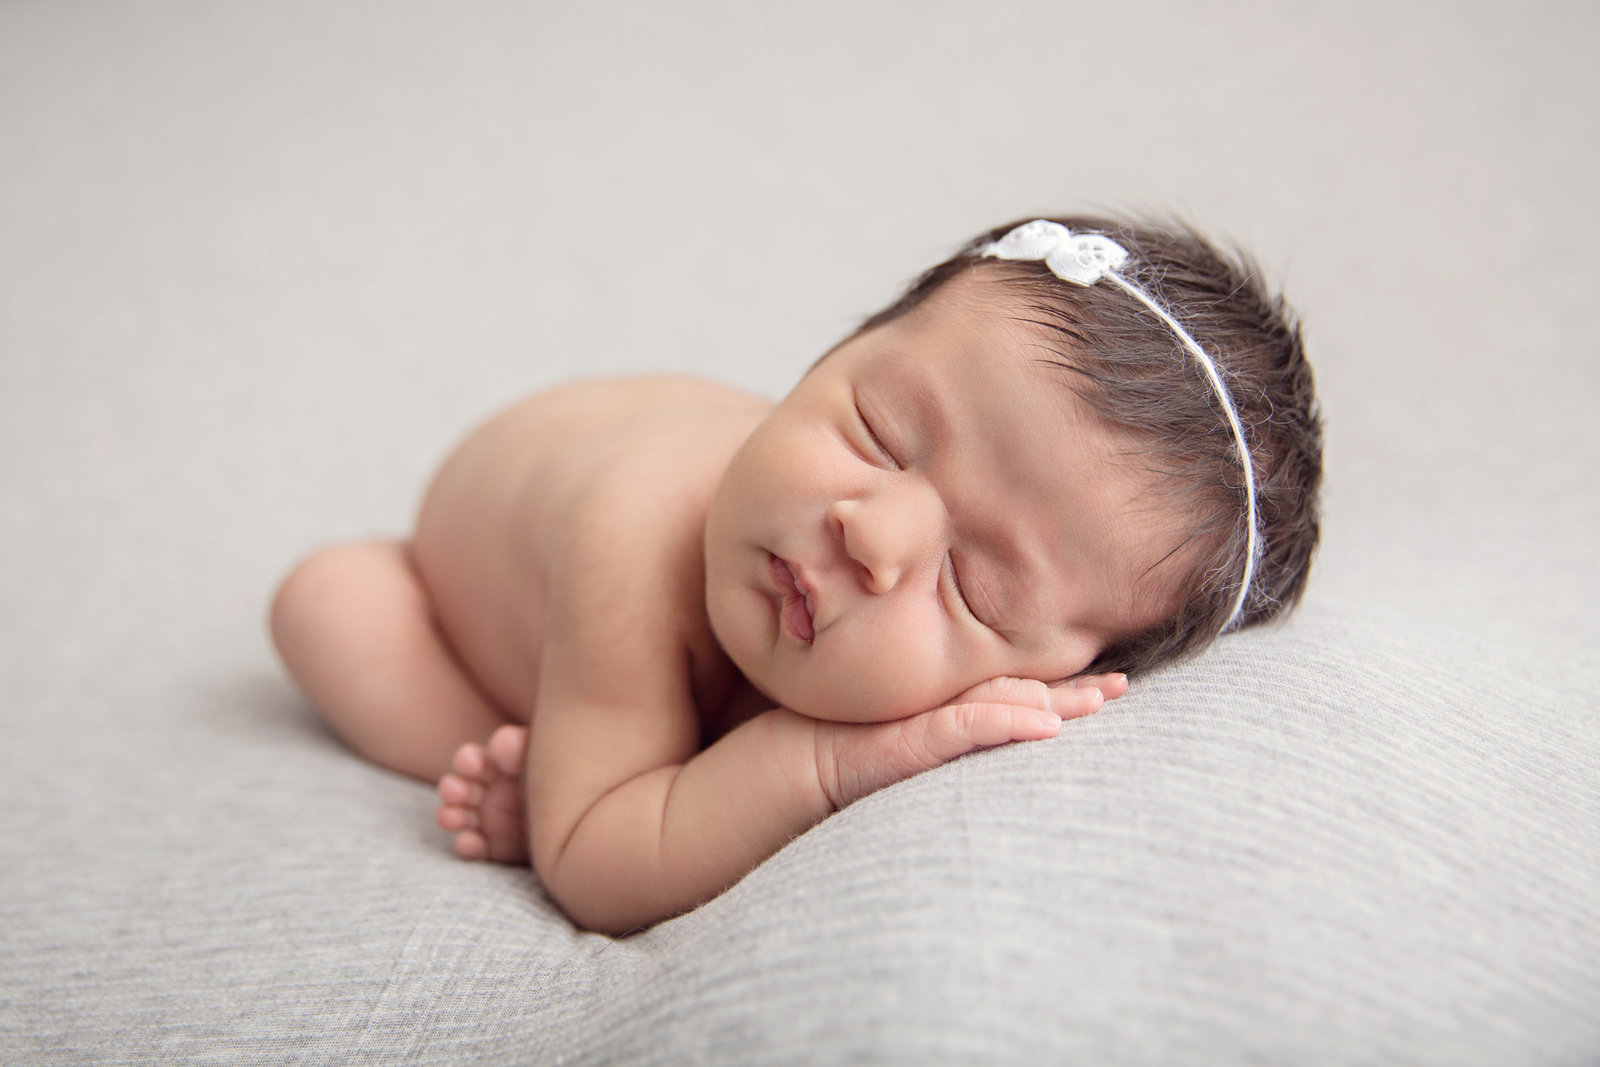 sleeping newborn baby in womb pose on light grey fabric with white bow tieback